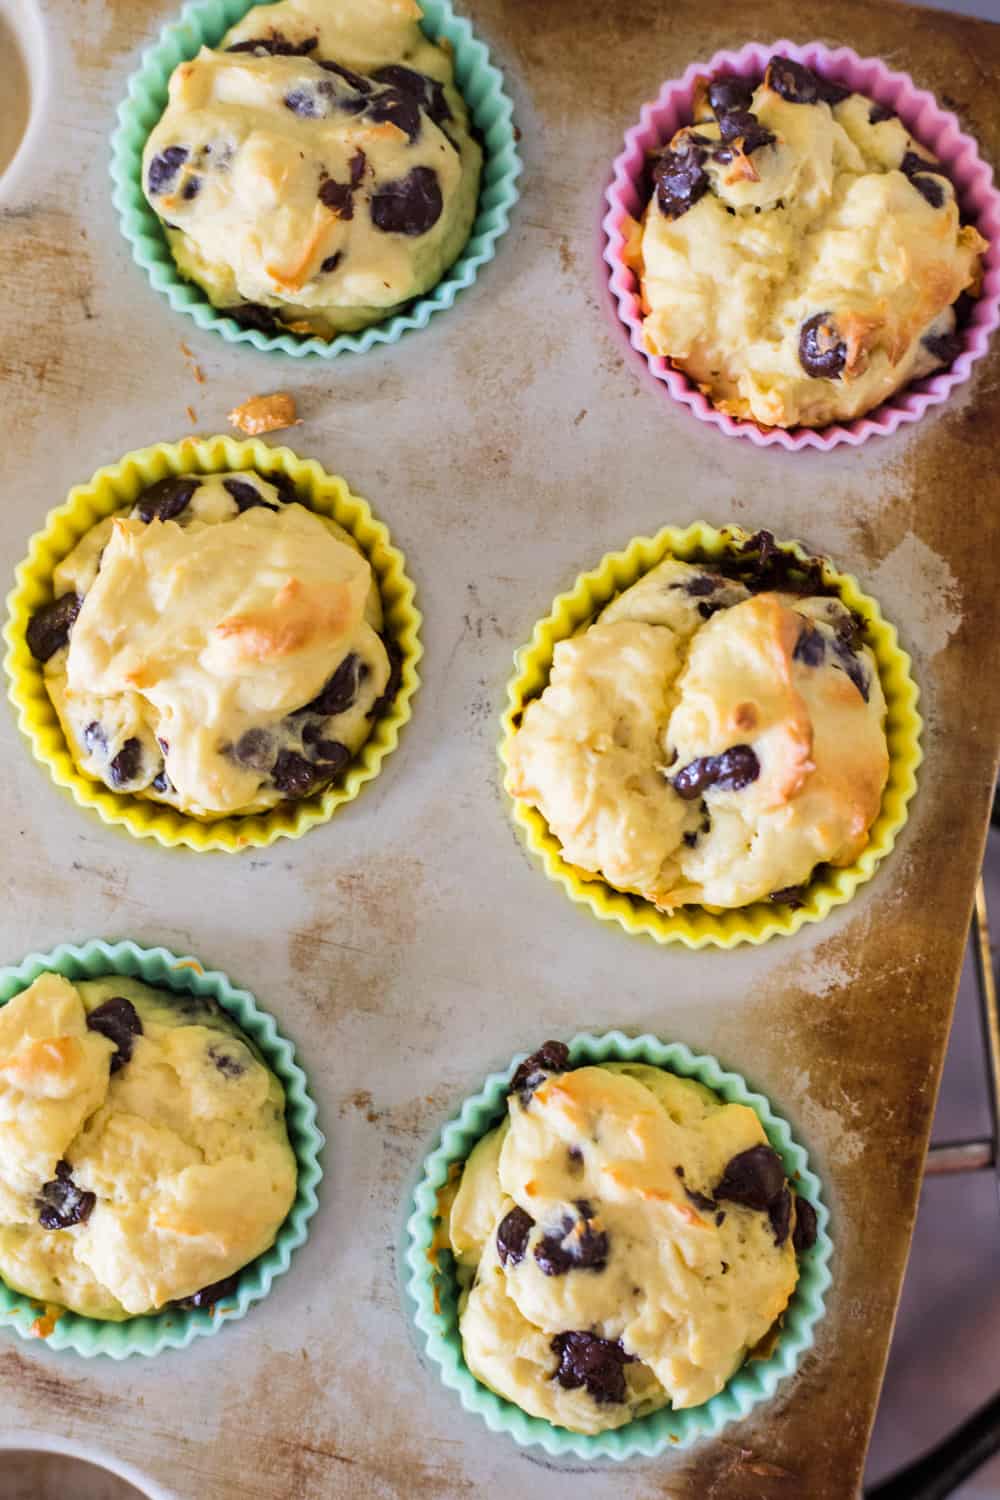 oat fiber muffins, oat fibre muffins, oat fiber recipes, low carb muffins no nuts, keto muffins no nuts, keto muffins no almond flour, keto muffins no coconut flour, muffins with oat fiber,